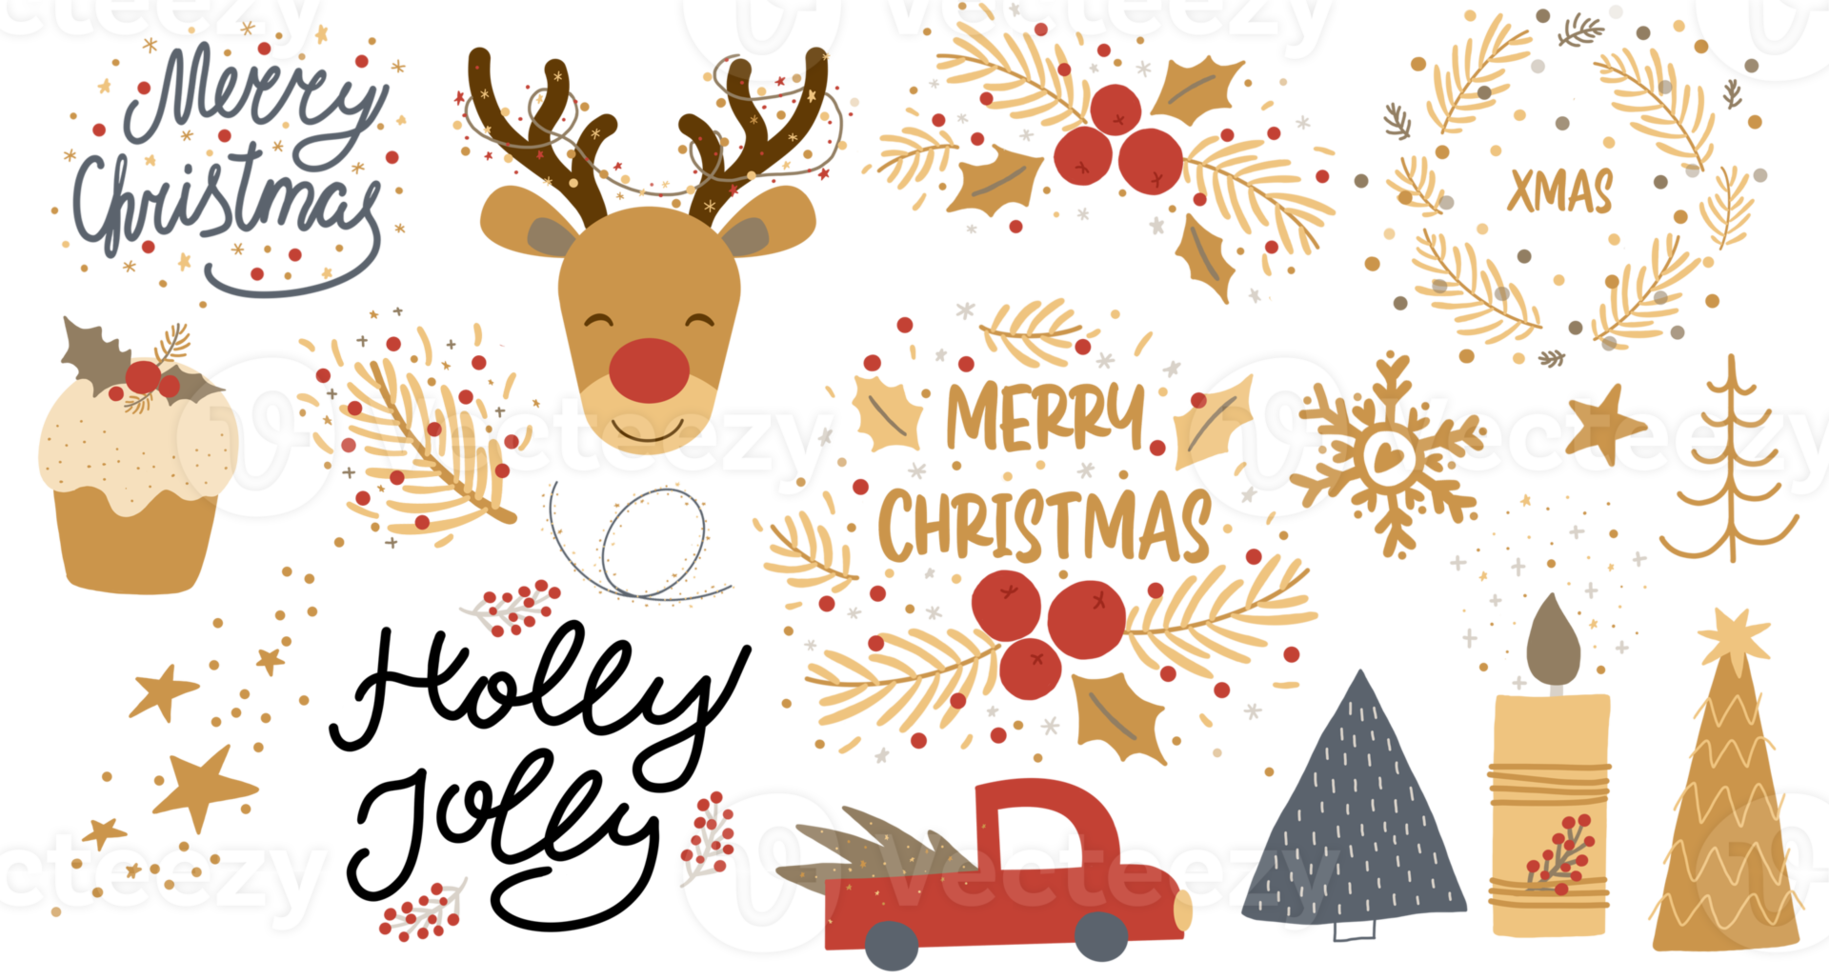 Golden Christmas elements set, red Christmas truck, tree, reindeer, holly berry, Merry Christmas handwritten lettering, snowflake stars decorative illustration. Decorative winter holiday collection png